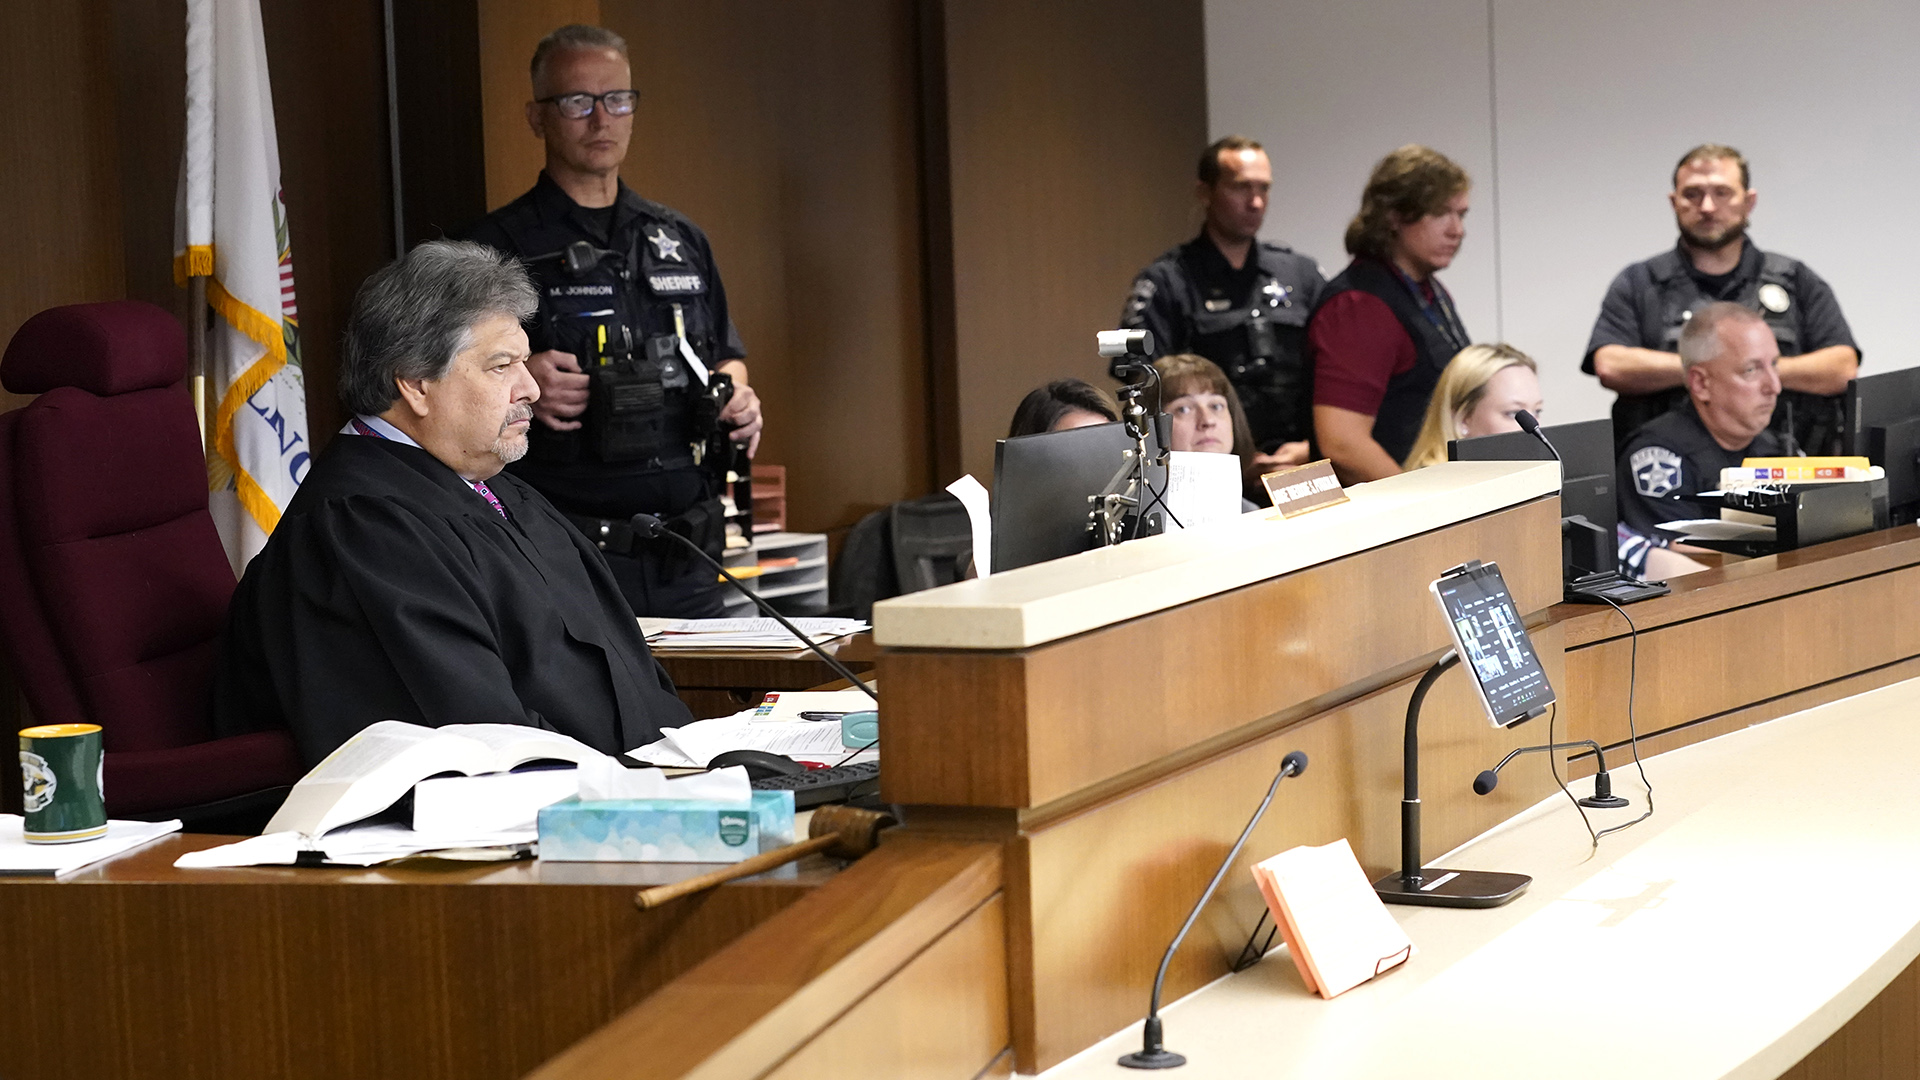 Judge Theodore Potkonjak sits behind a dais with courtroom officers and other staff in the background.